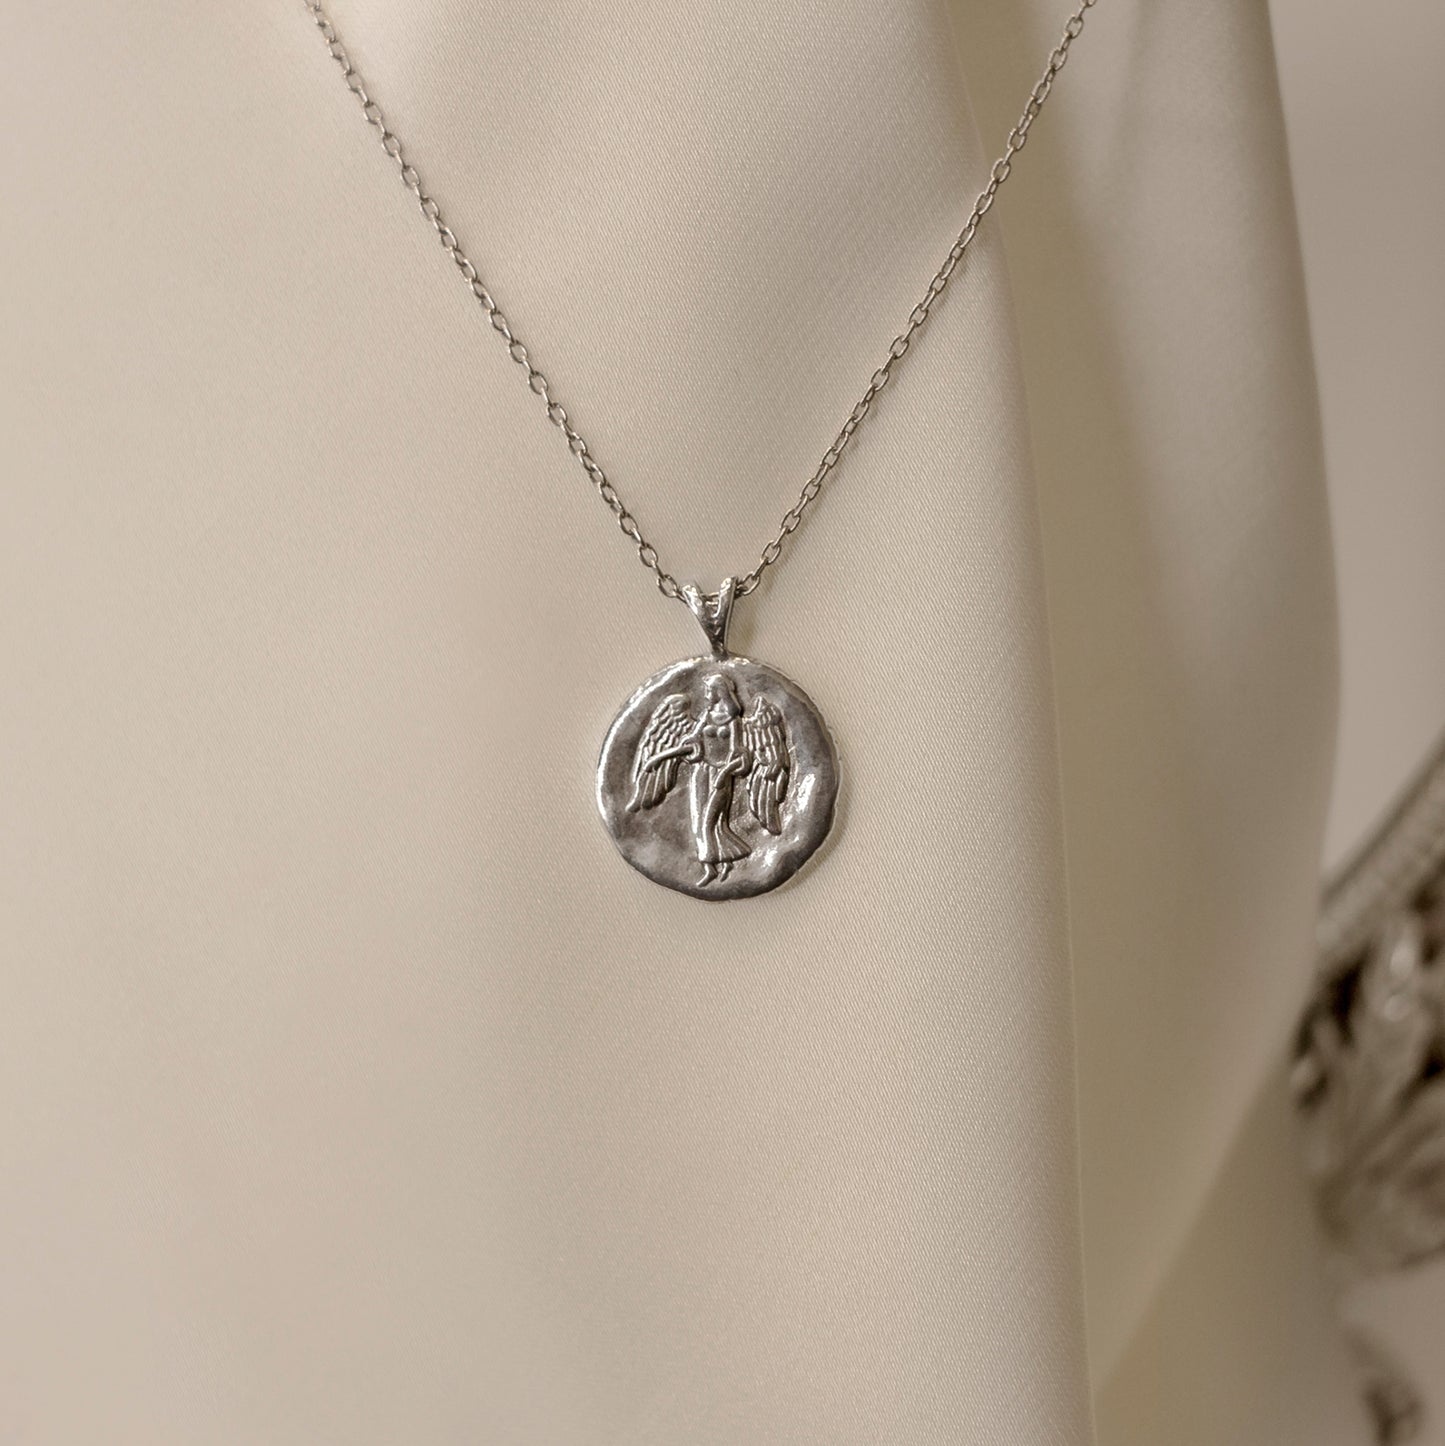 Pendant, Zodiac sign Virgo on a chain, sterling  silver